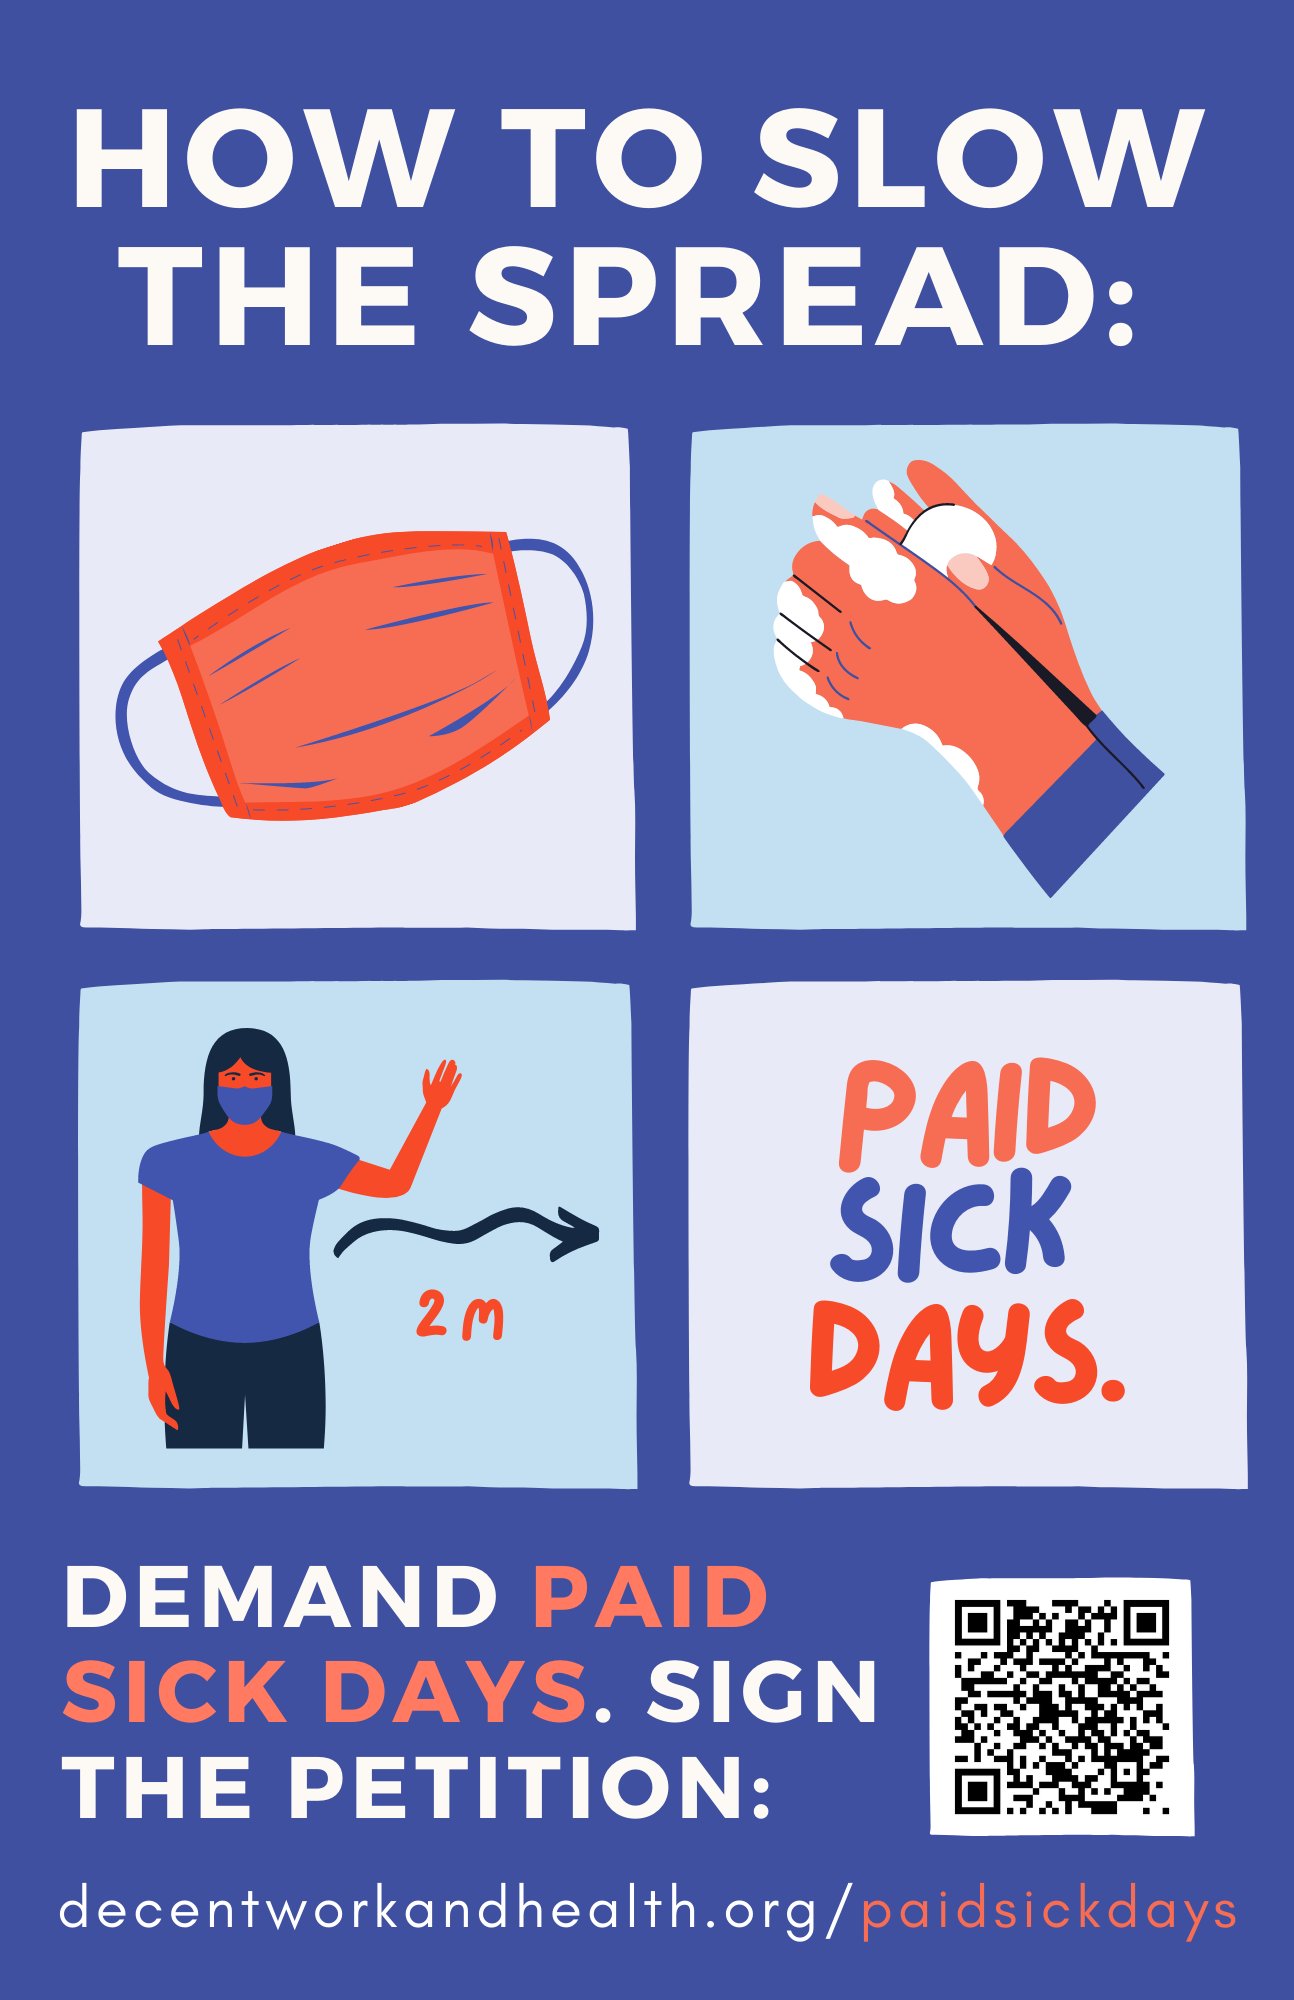 Ontario’s postsecondary staff, students, and faculty support paid sick days for all